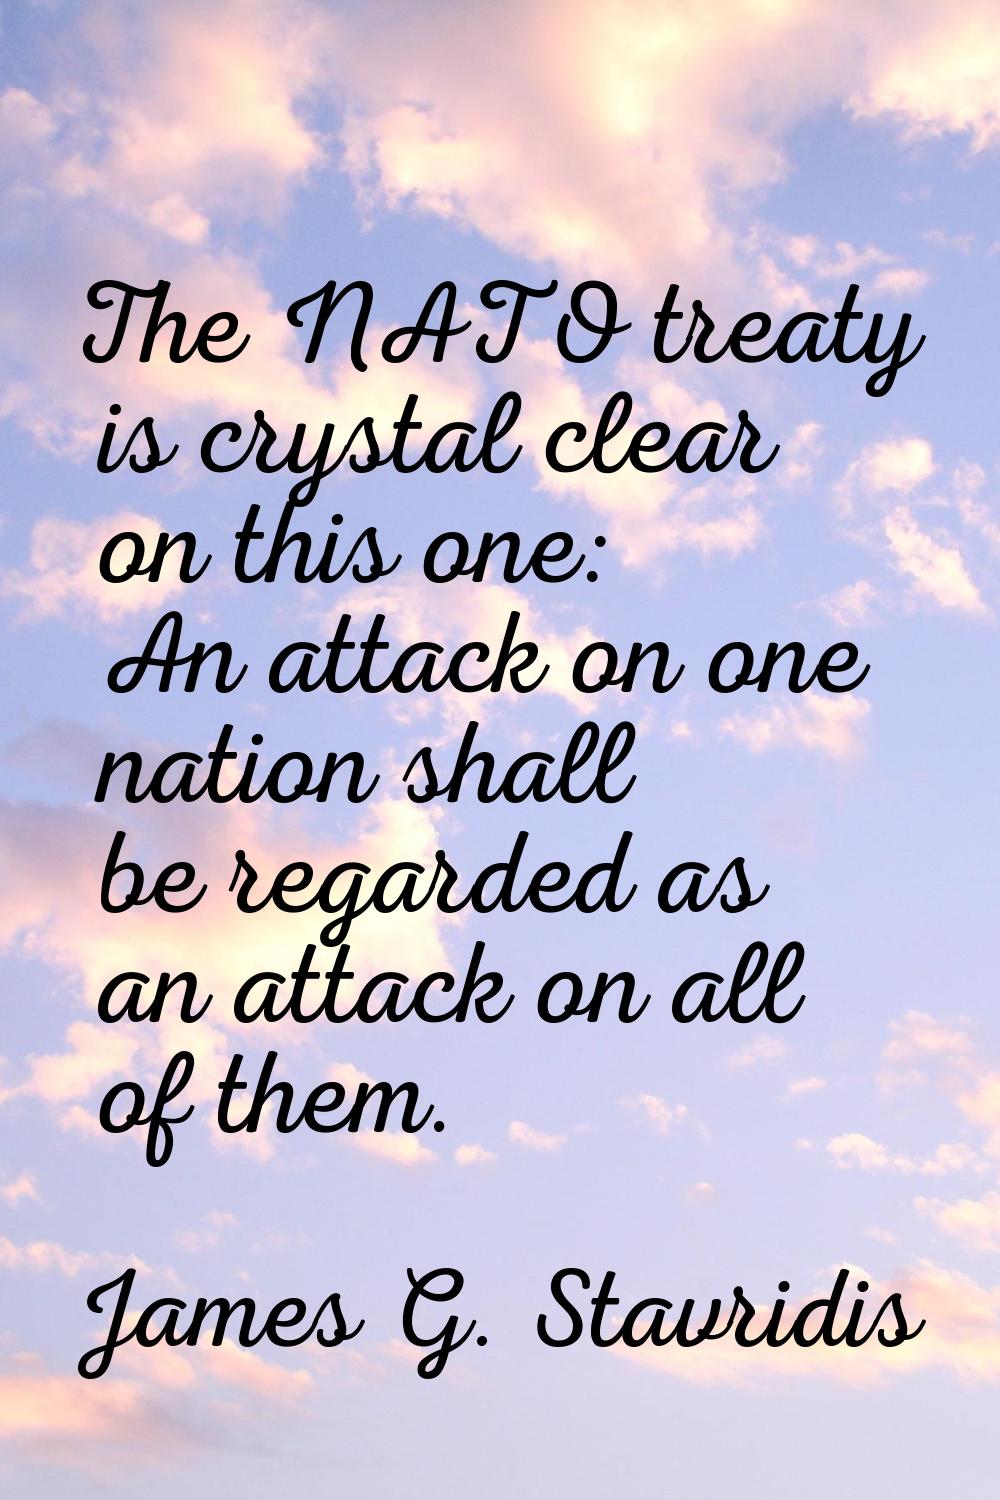 The NATO treaty is crystal clear on this one: An attack on one nation shall be regarded as an attac